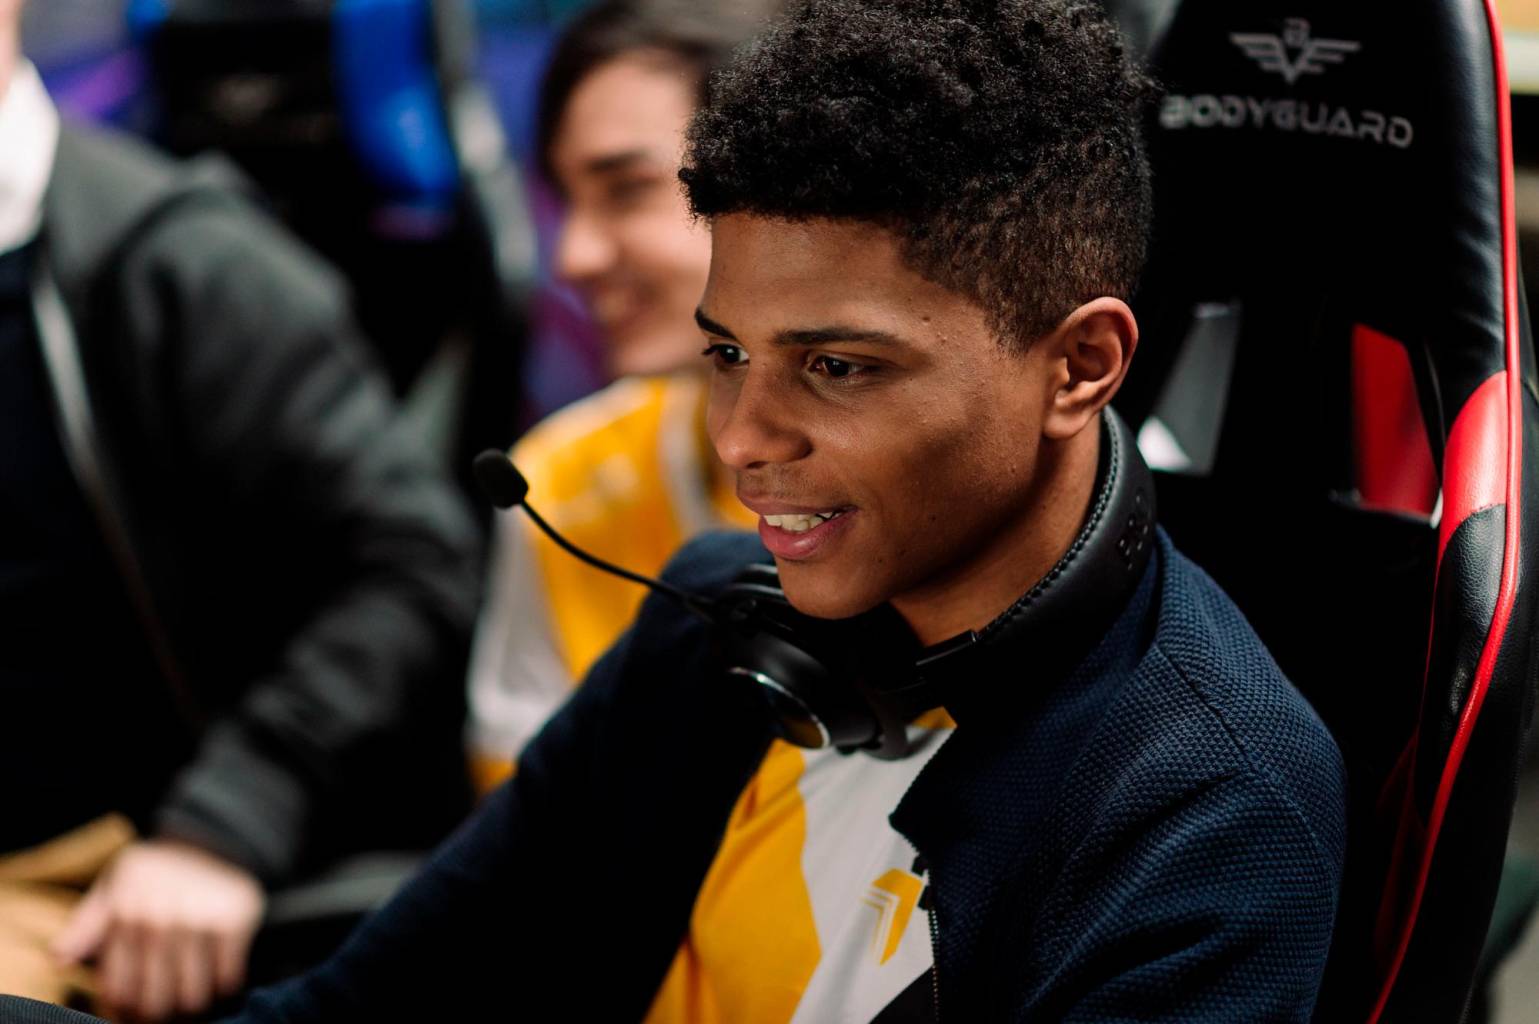 Dominican is the newcomer of the year in the League of Legends